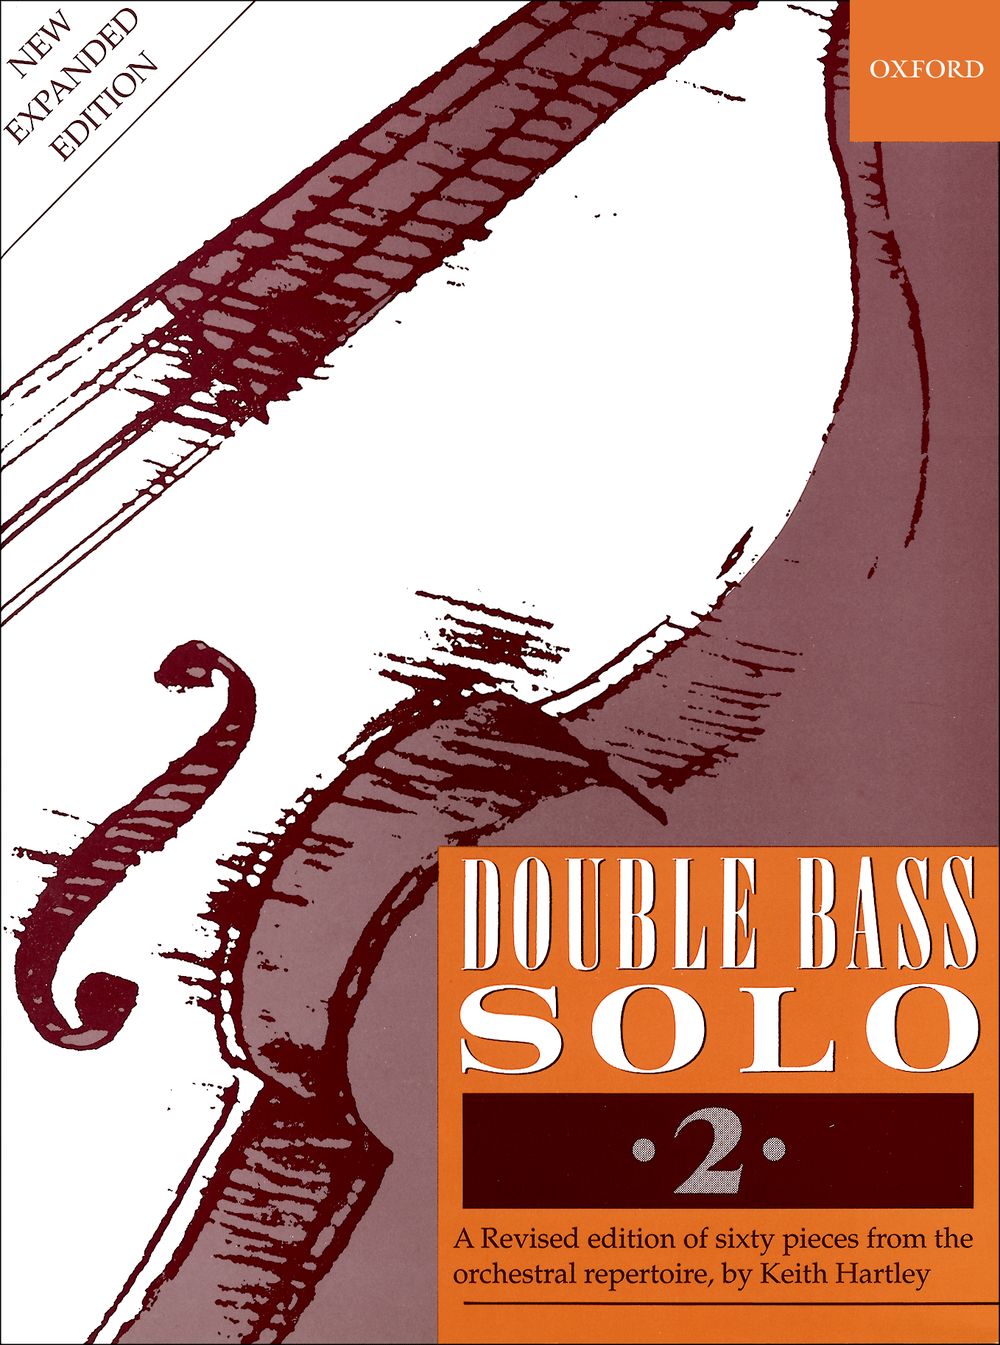 Double Bass Solo 2 Hartley New Expanded Ed Sheet Music Songbook